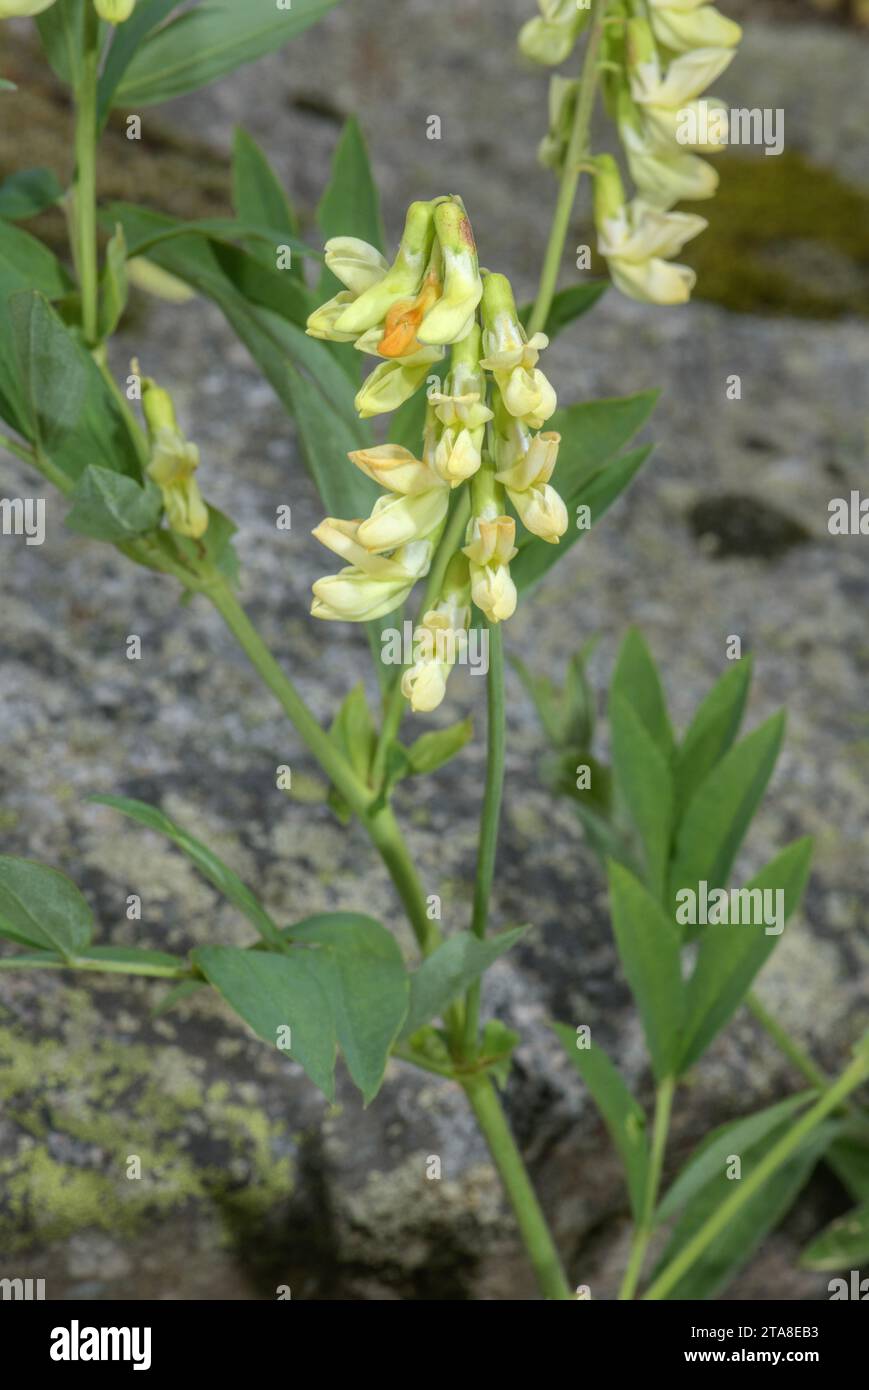 A mountain vetchling, Lathyrus ochraceus ssp. occidentalis, in flower in the Alps. Stock Photo